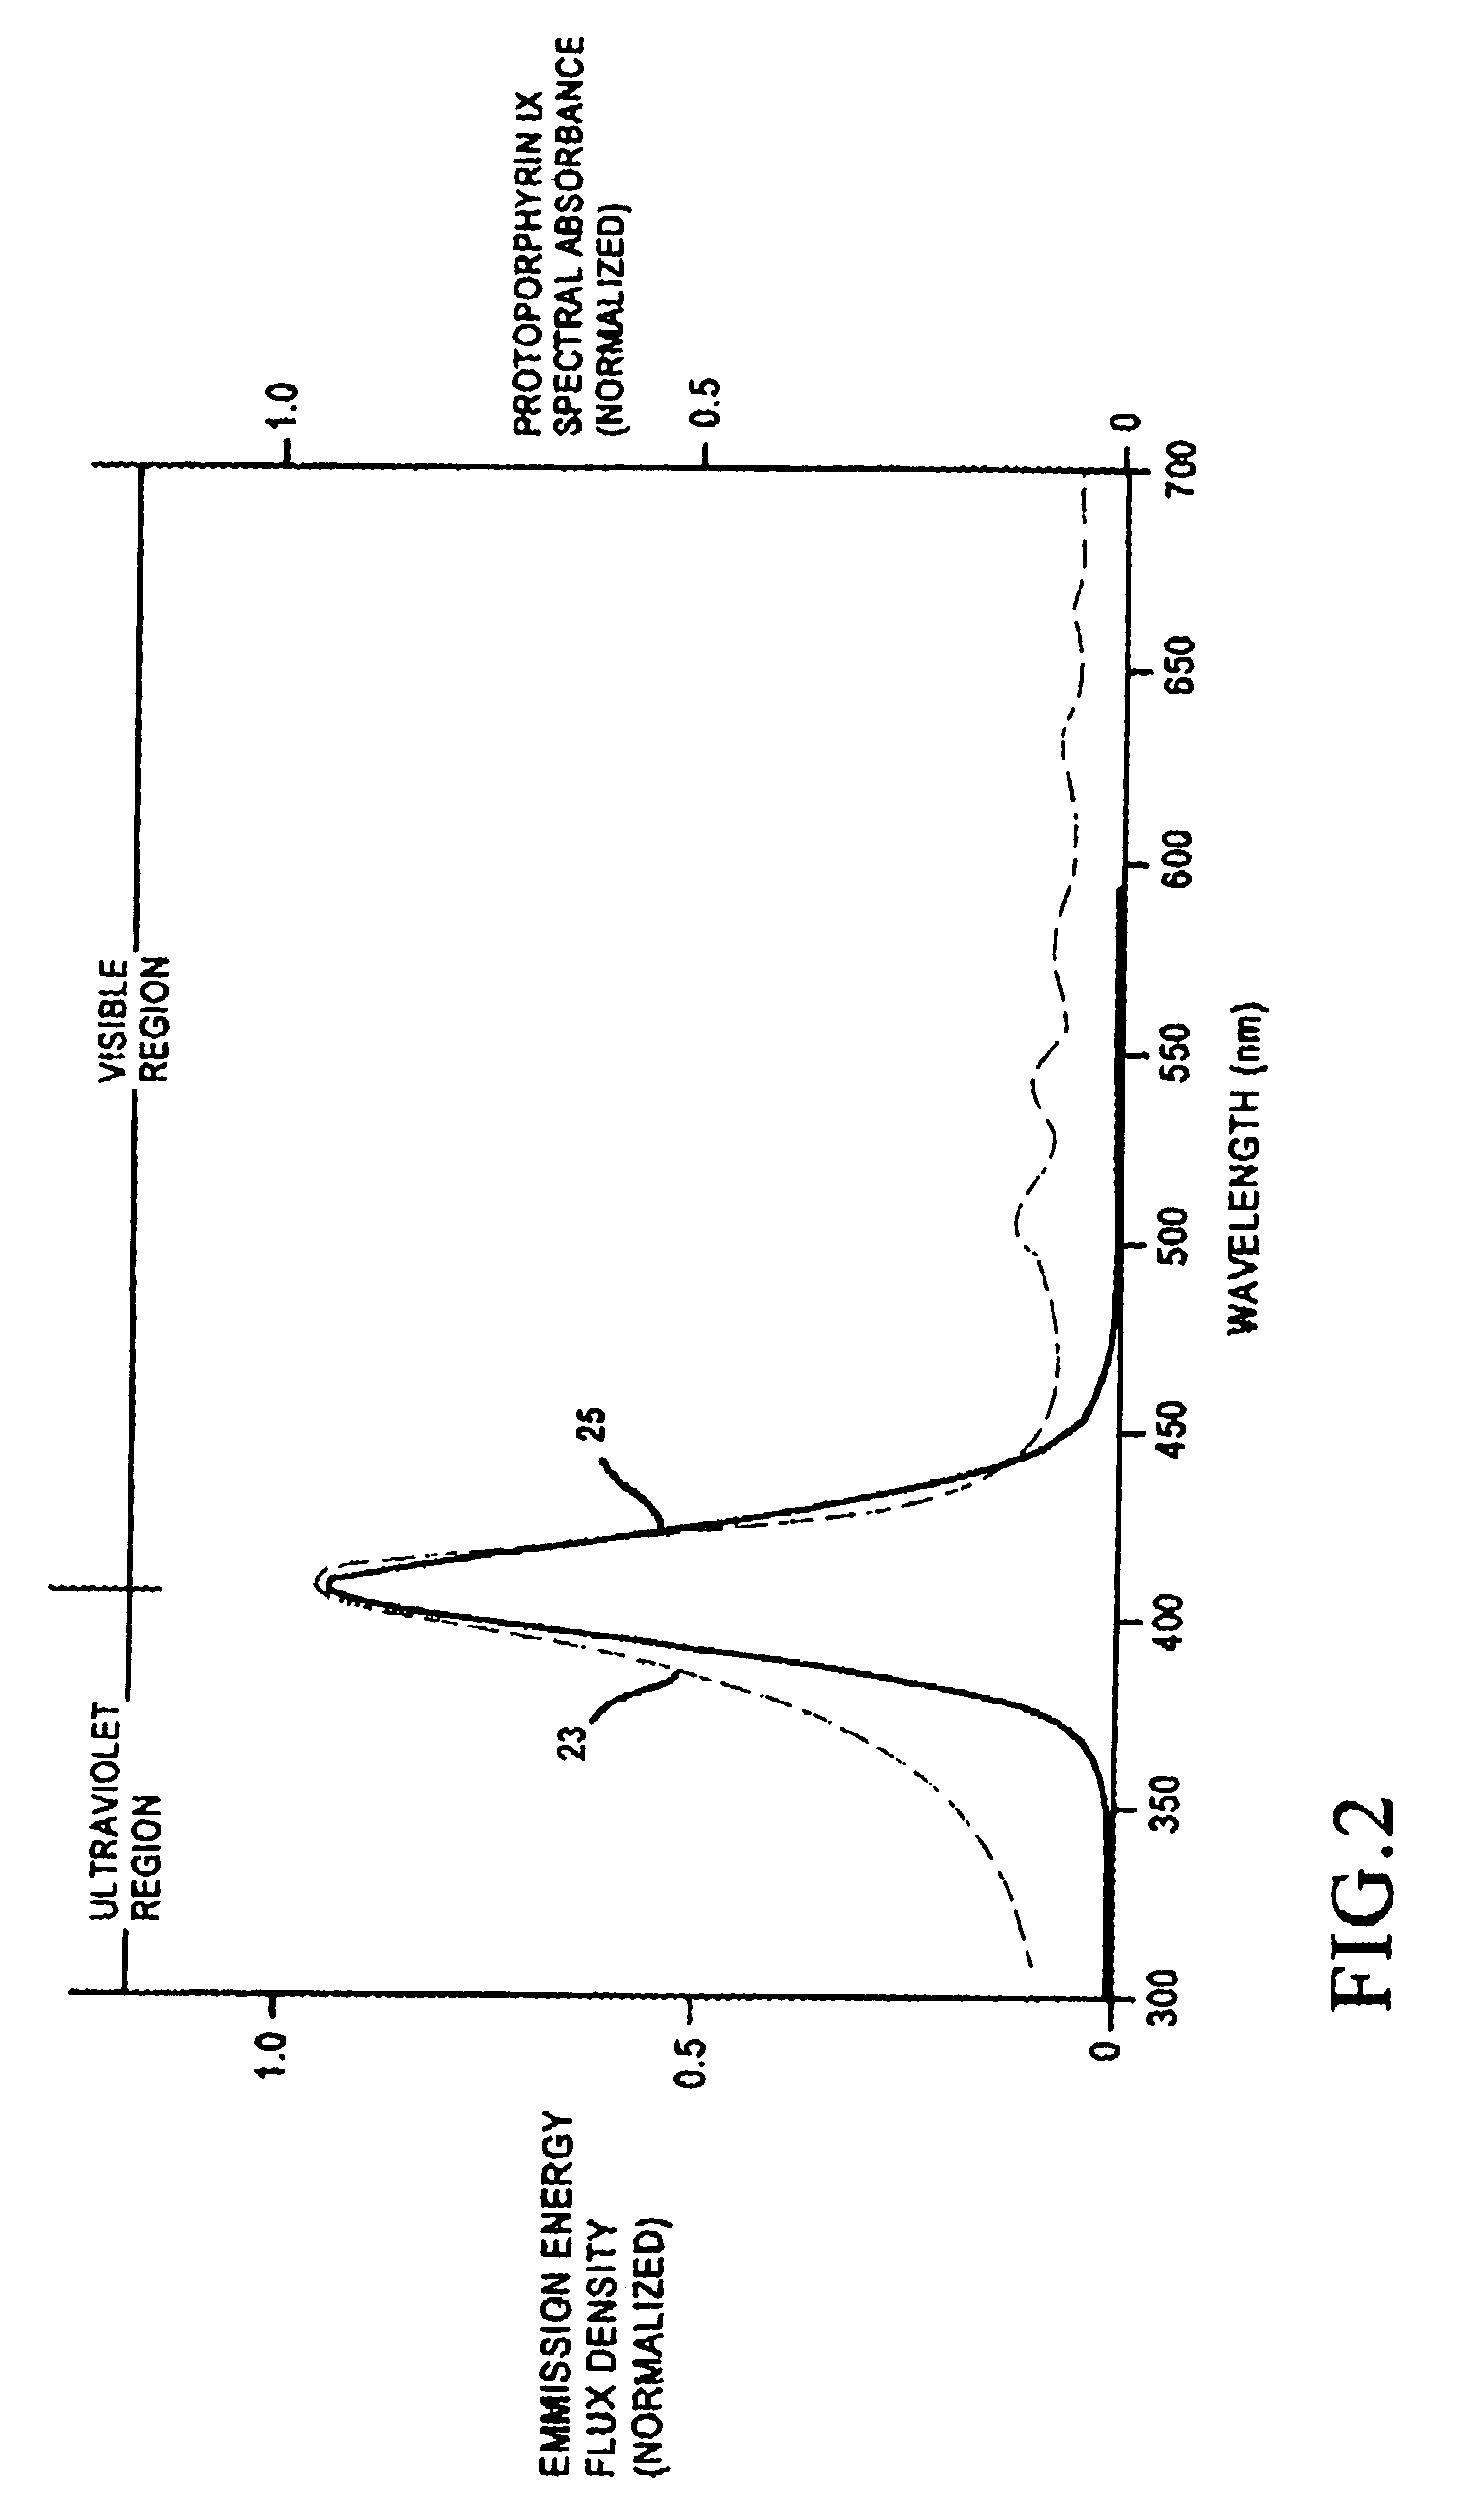 System for treatment of acne skin condition using a narrow band light source